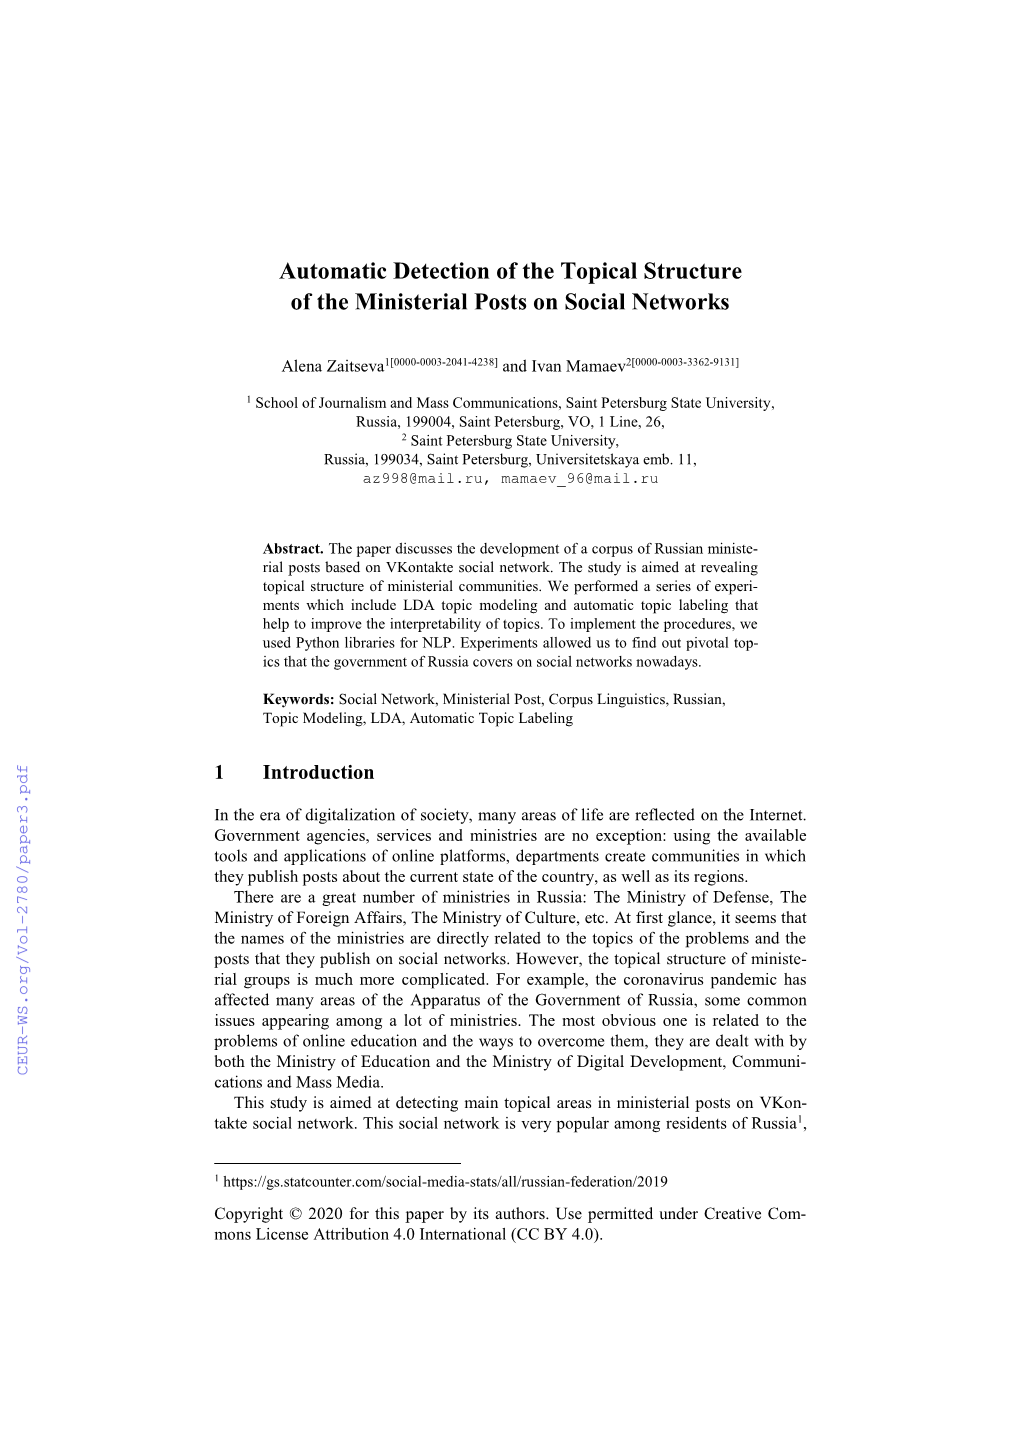 Automatic Detection of the Topical Structure of the Ministerial Posts on Social Networks